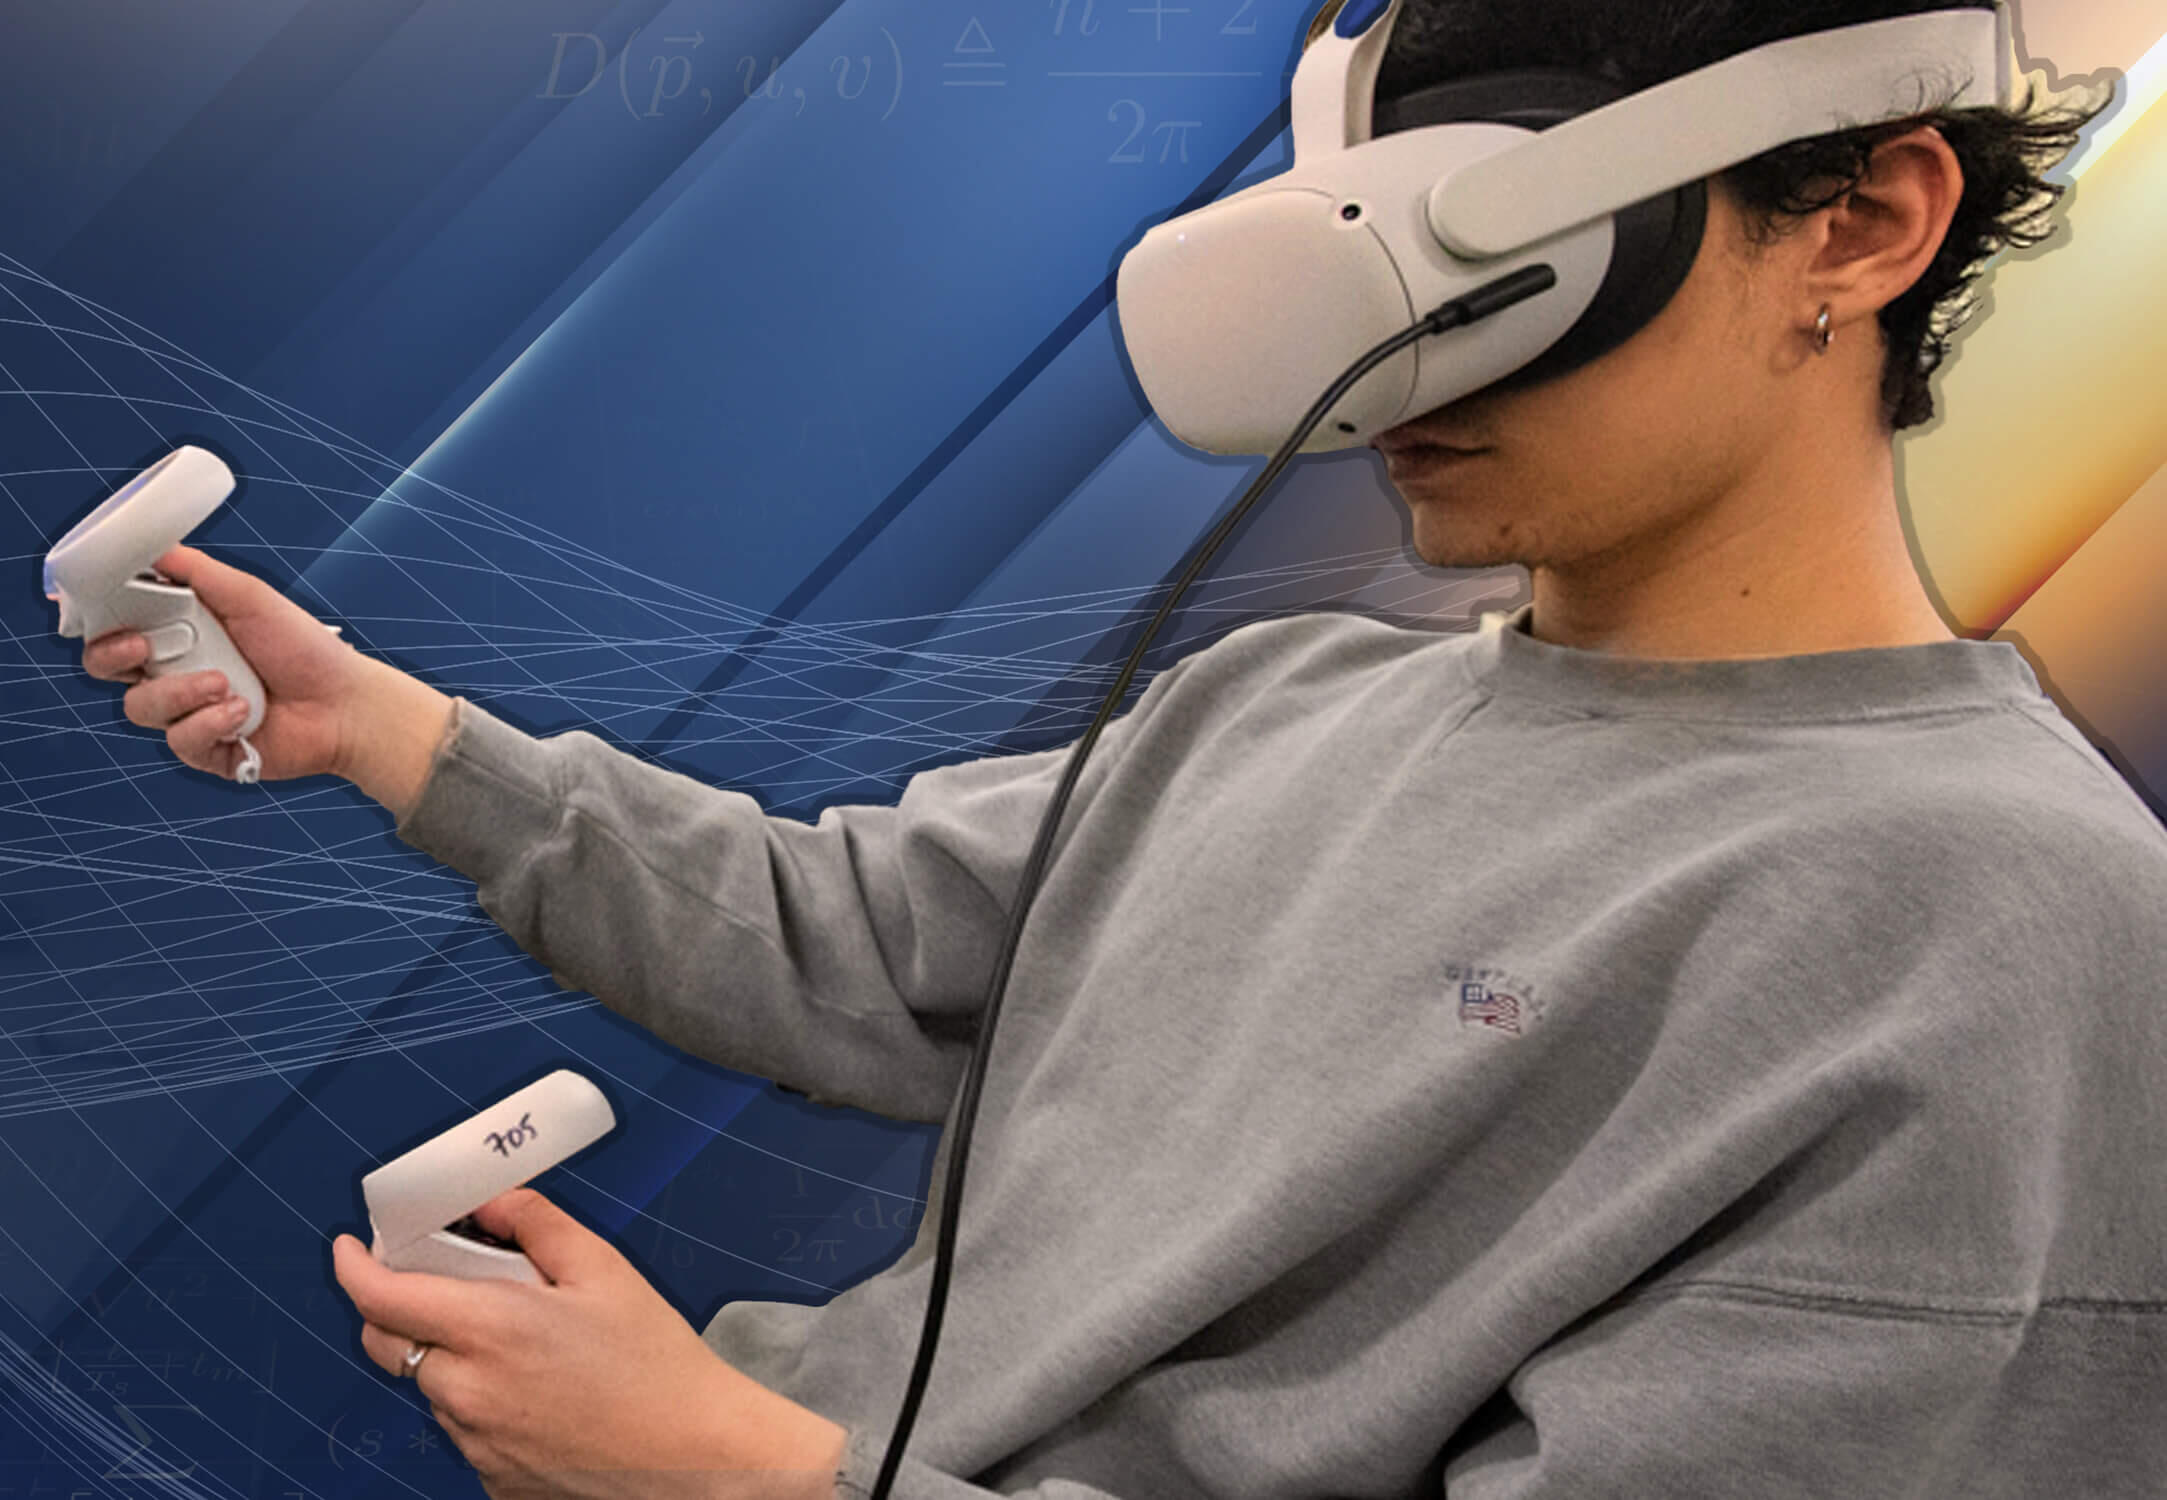 A person wearing VR headset and holding two handheld devices.